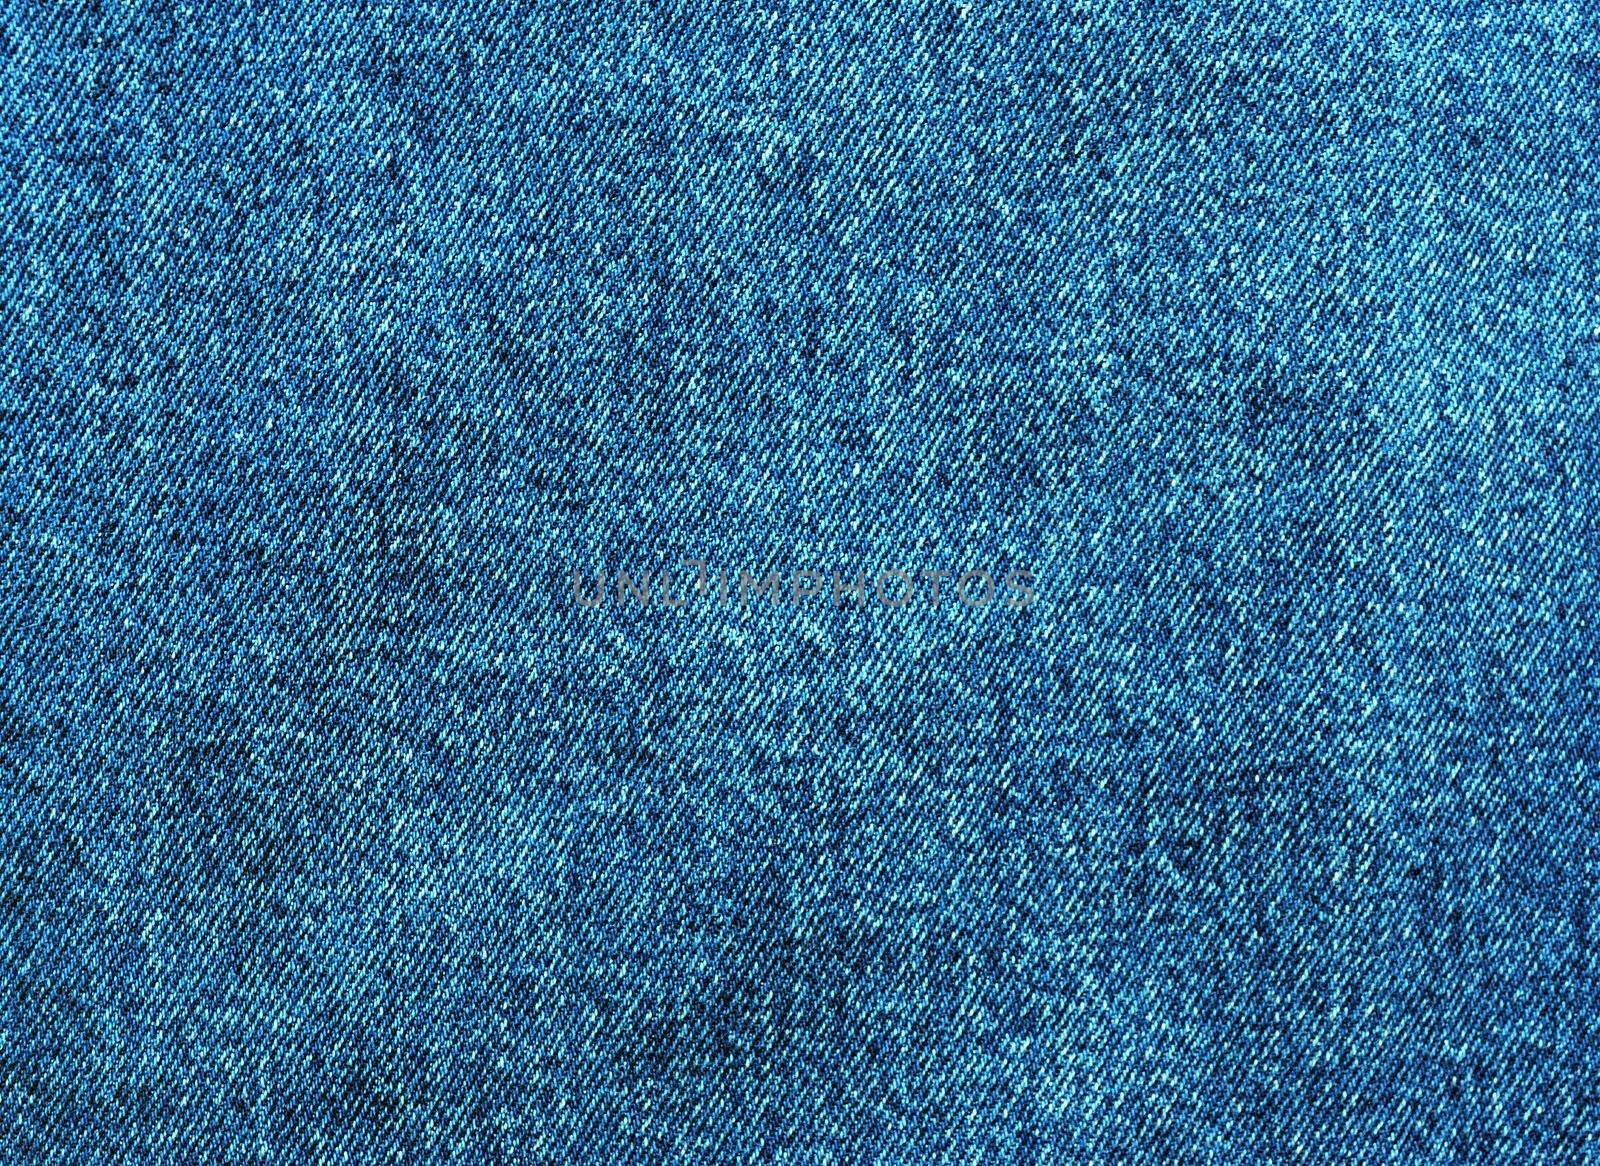 texture of denim cotton is jean material